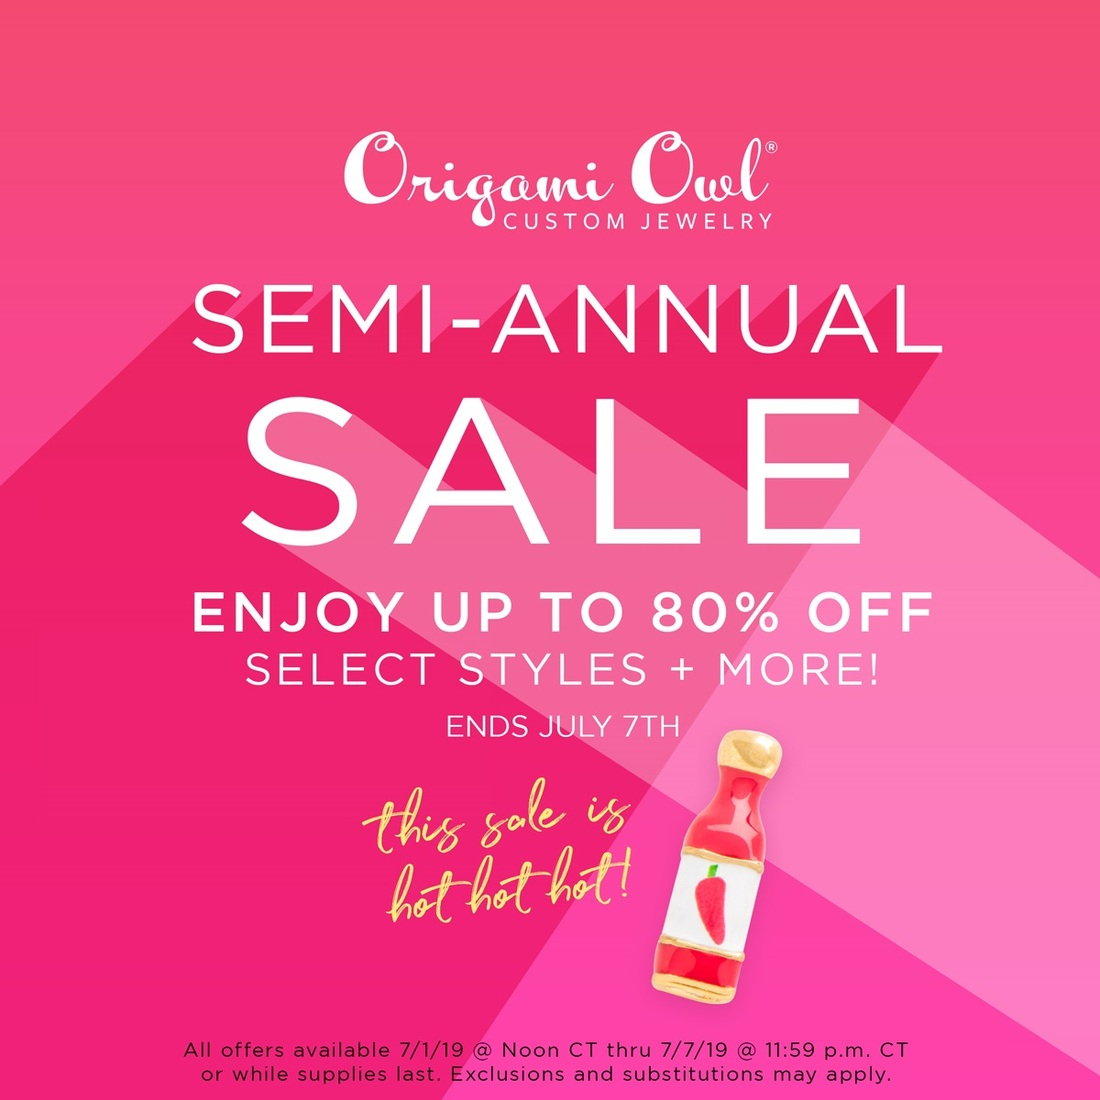 Origami Owl Prices The Origami Owl Semi Annual Sale Is Going On Now Direct Sales And